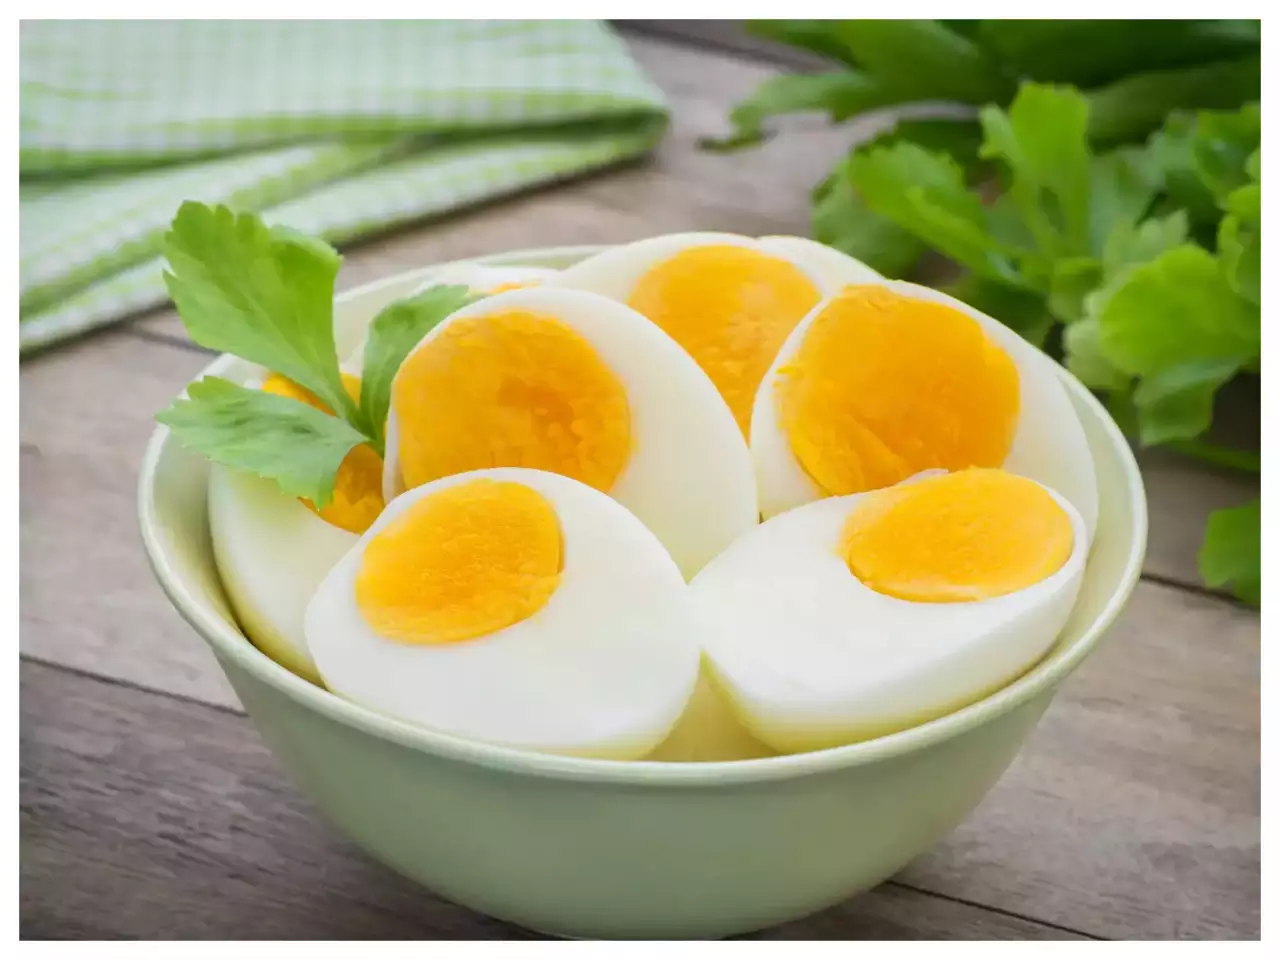 This is what happens to your body when you eat two eggs a day. I could never believe it’s awesome!